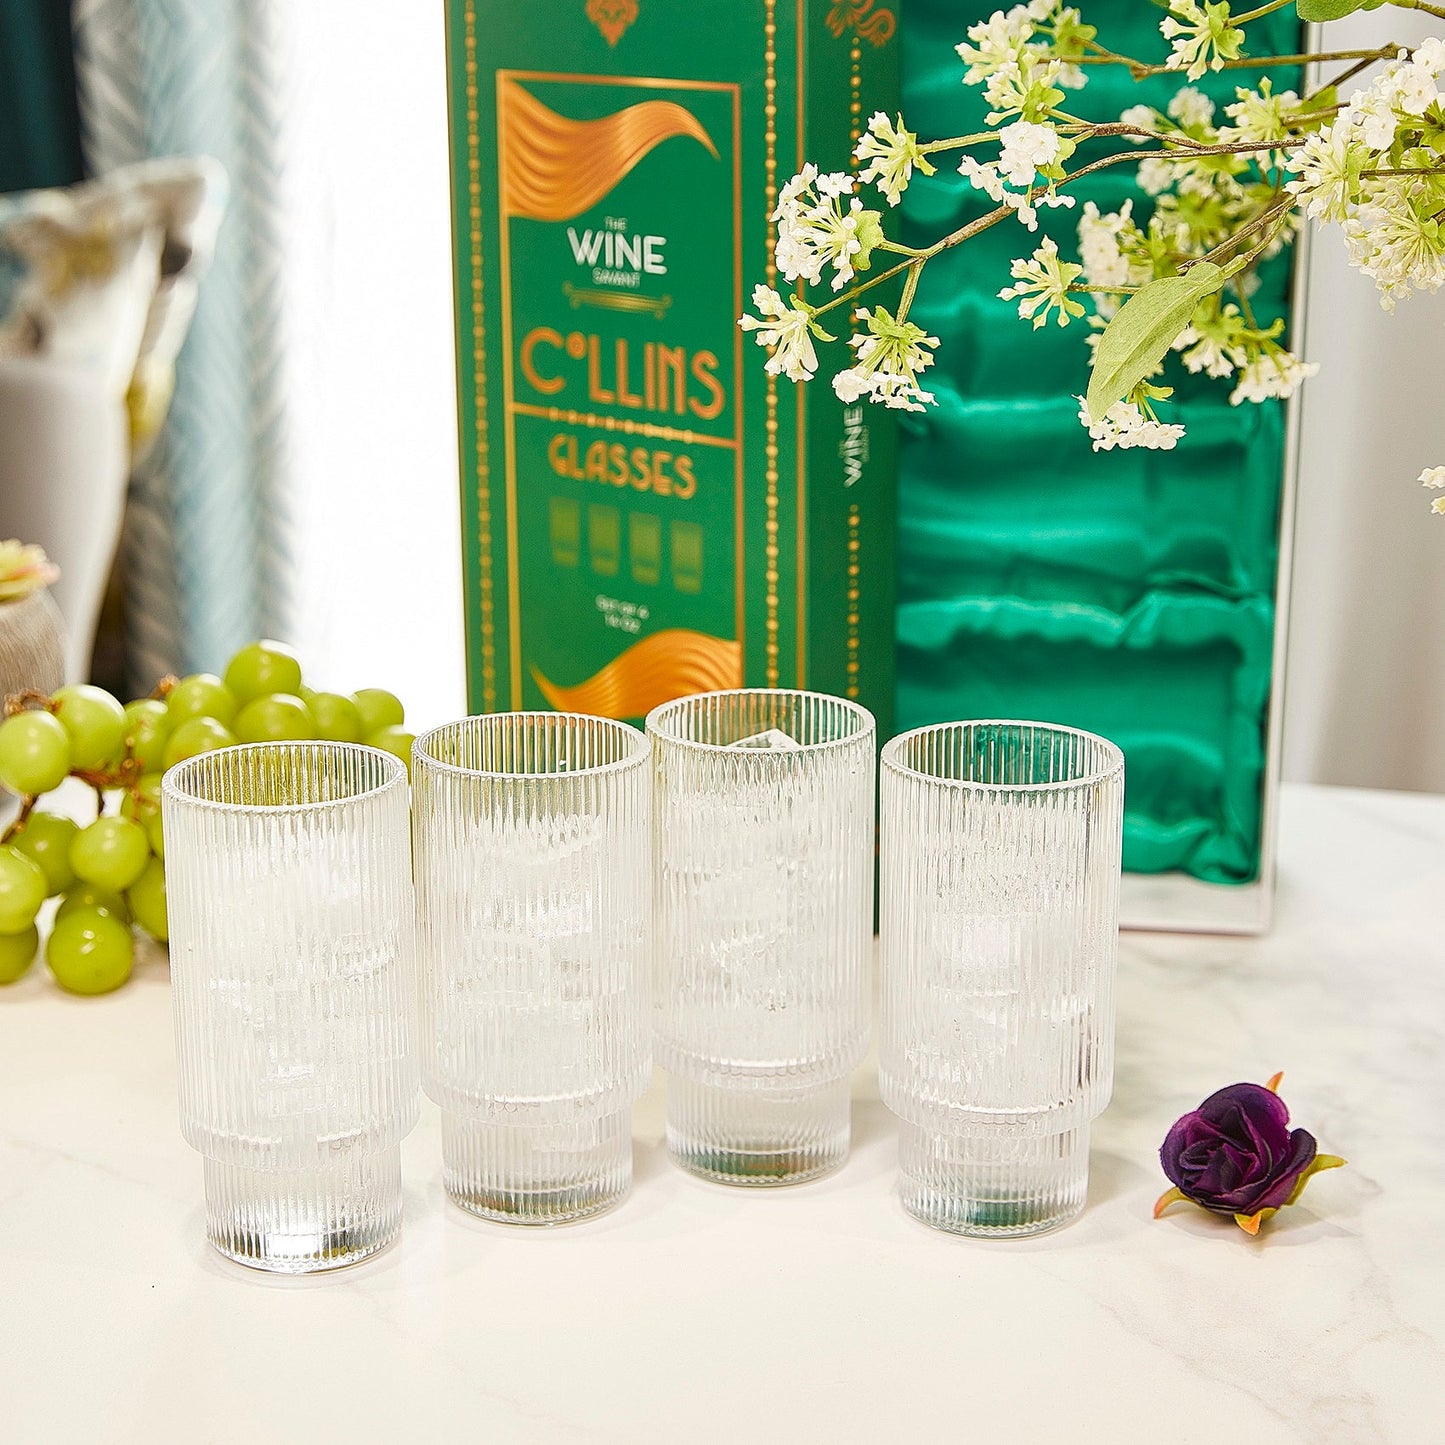 Vintage Art Deco Crystal Highball Ribbed Glass Set of 4 - Ripple, Collins Glassware 14oz Classic Crystal Cocktail Glasses Perfect for Water, Champagne, Beer, Juice, Tom Cocktails - Barware Tumblers-1